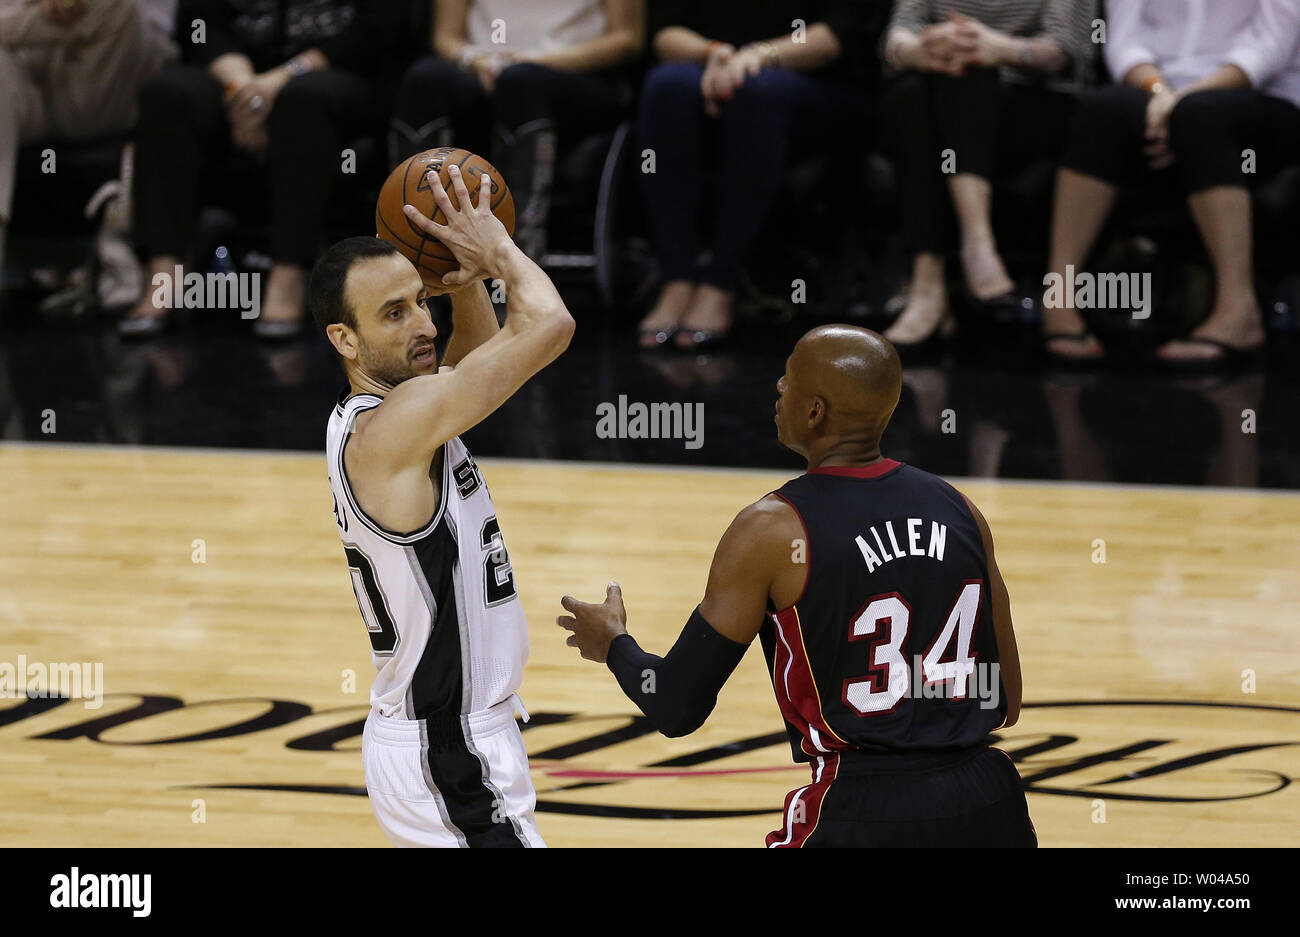 Miami Heat guard Ray Allen (34) defends against San Antonio Spurs guard Manu Ginobili (20) in game 2 of the NBA Finals at the AT&T Center in San Antonio, Texas on June 8, 2014. The Heat defeated the Spurs 98-96 to tie the series at 1-1 in the best of seven series.     UPI/Aaron M. Sprecher Stock Photo